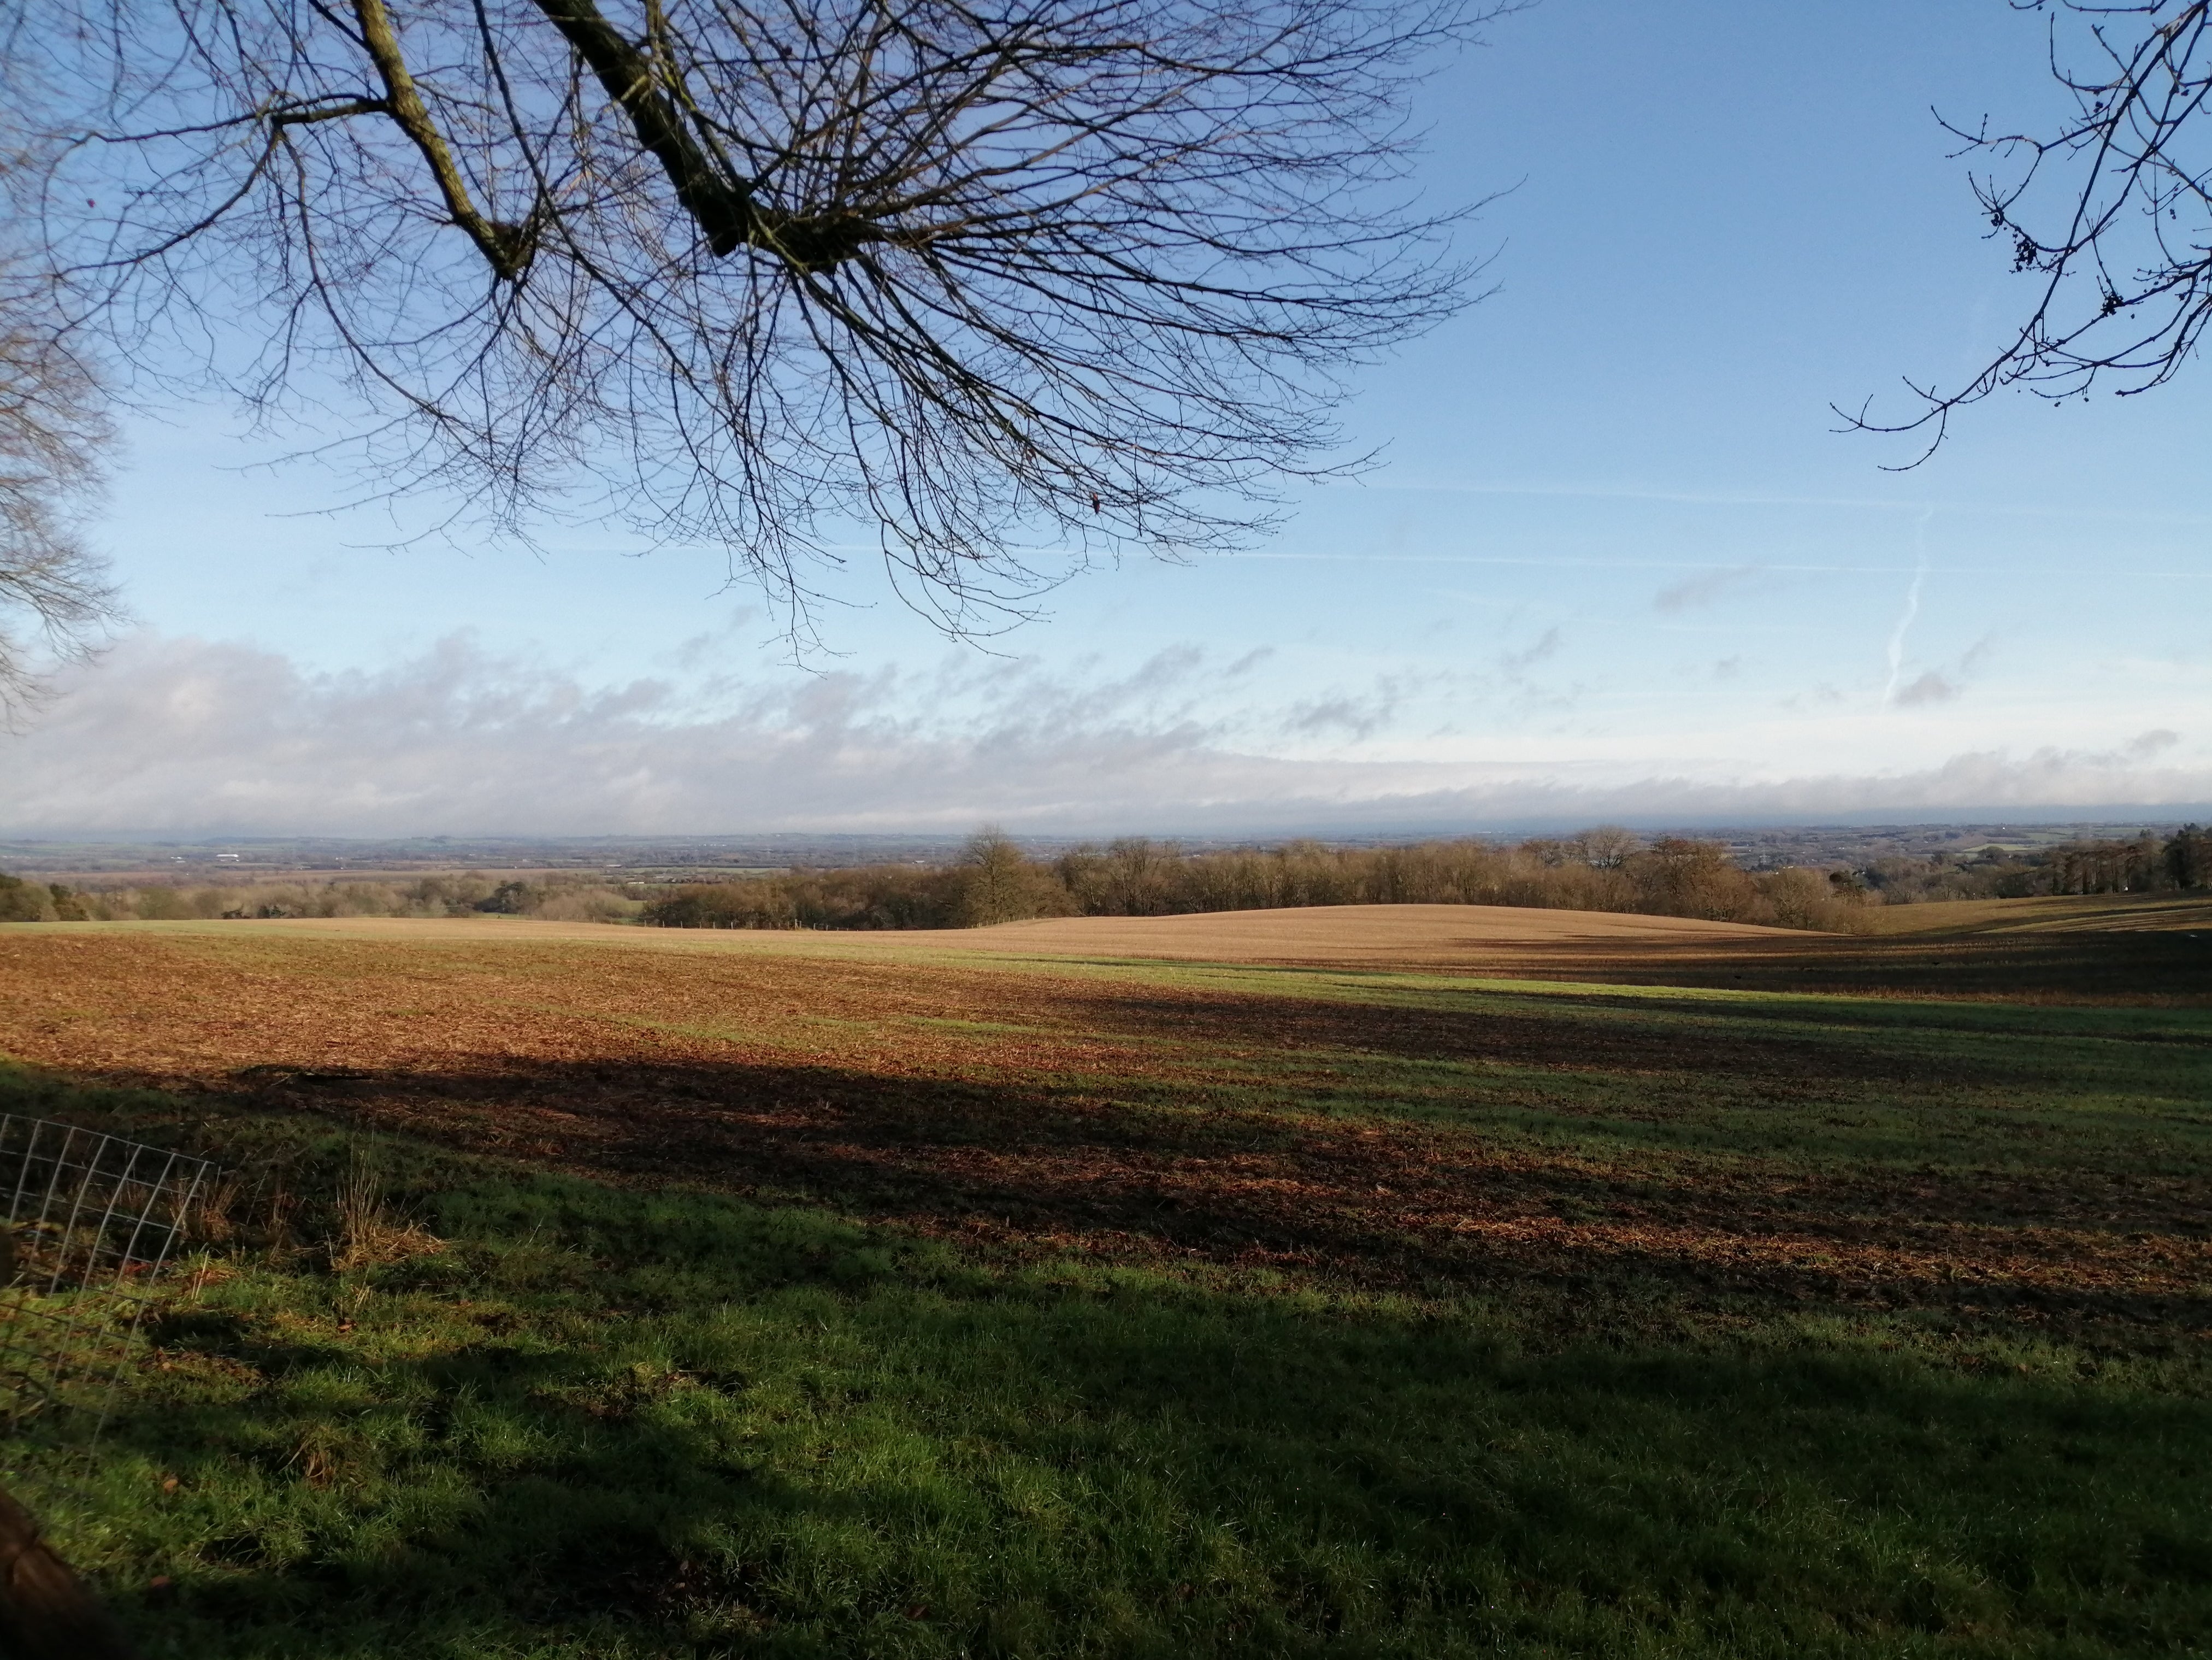 Shotover Hill offers stunning views over Oxfordshire